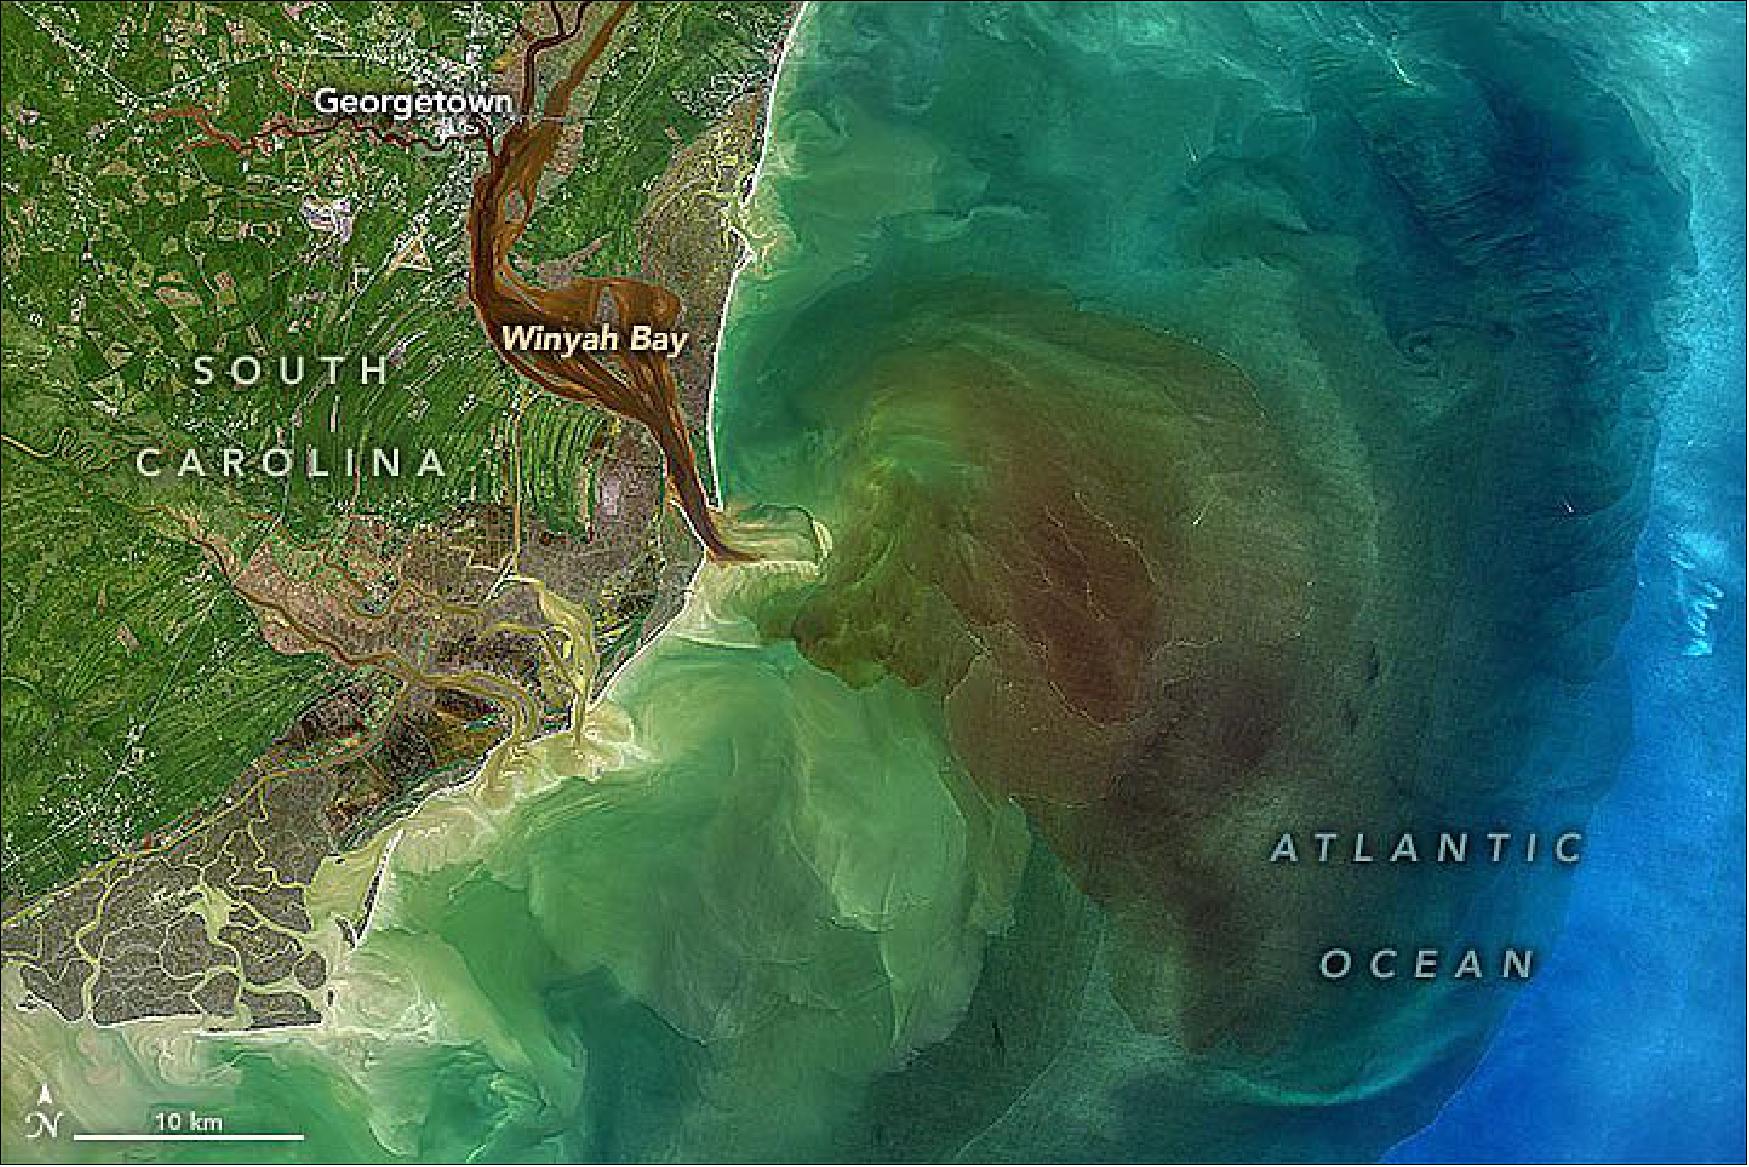 Figure 19: One of the first attempts to set up a permanent European colony in the contiguous United States ended in disaster. After heavy rains, stained floodwaters can get flushed out of swamps and wetlands into the estuary and ocean. That was happening on October 1, 2020, when the Operational Land Imager (OLI) on Landsat-8 acquired this natural-color image of Winyah Bay. Many waterways were swollen following heavy rains from Hurricane Sally. [image credit: NASA image by Norman Kuring/NASA's Ocean Color Web, using Landsat data from the U.S. Geological Survey. Story by Adam Voiland, with information from James Morris (University of South Carolina)]